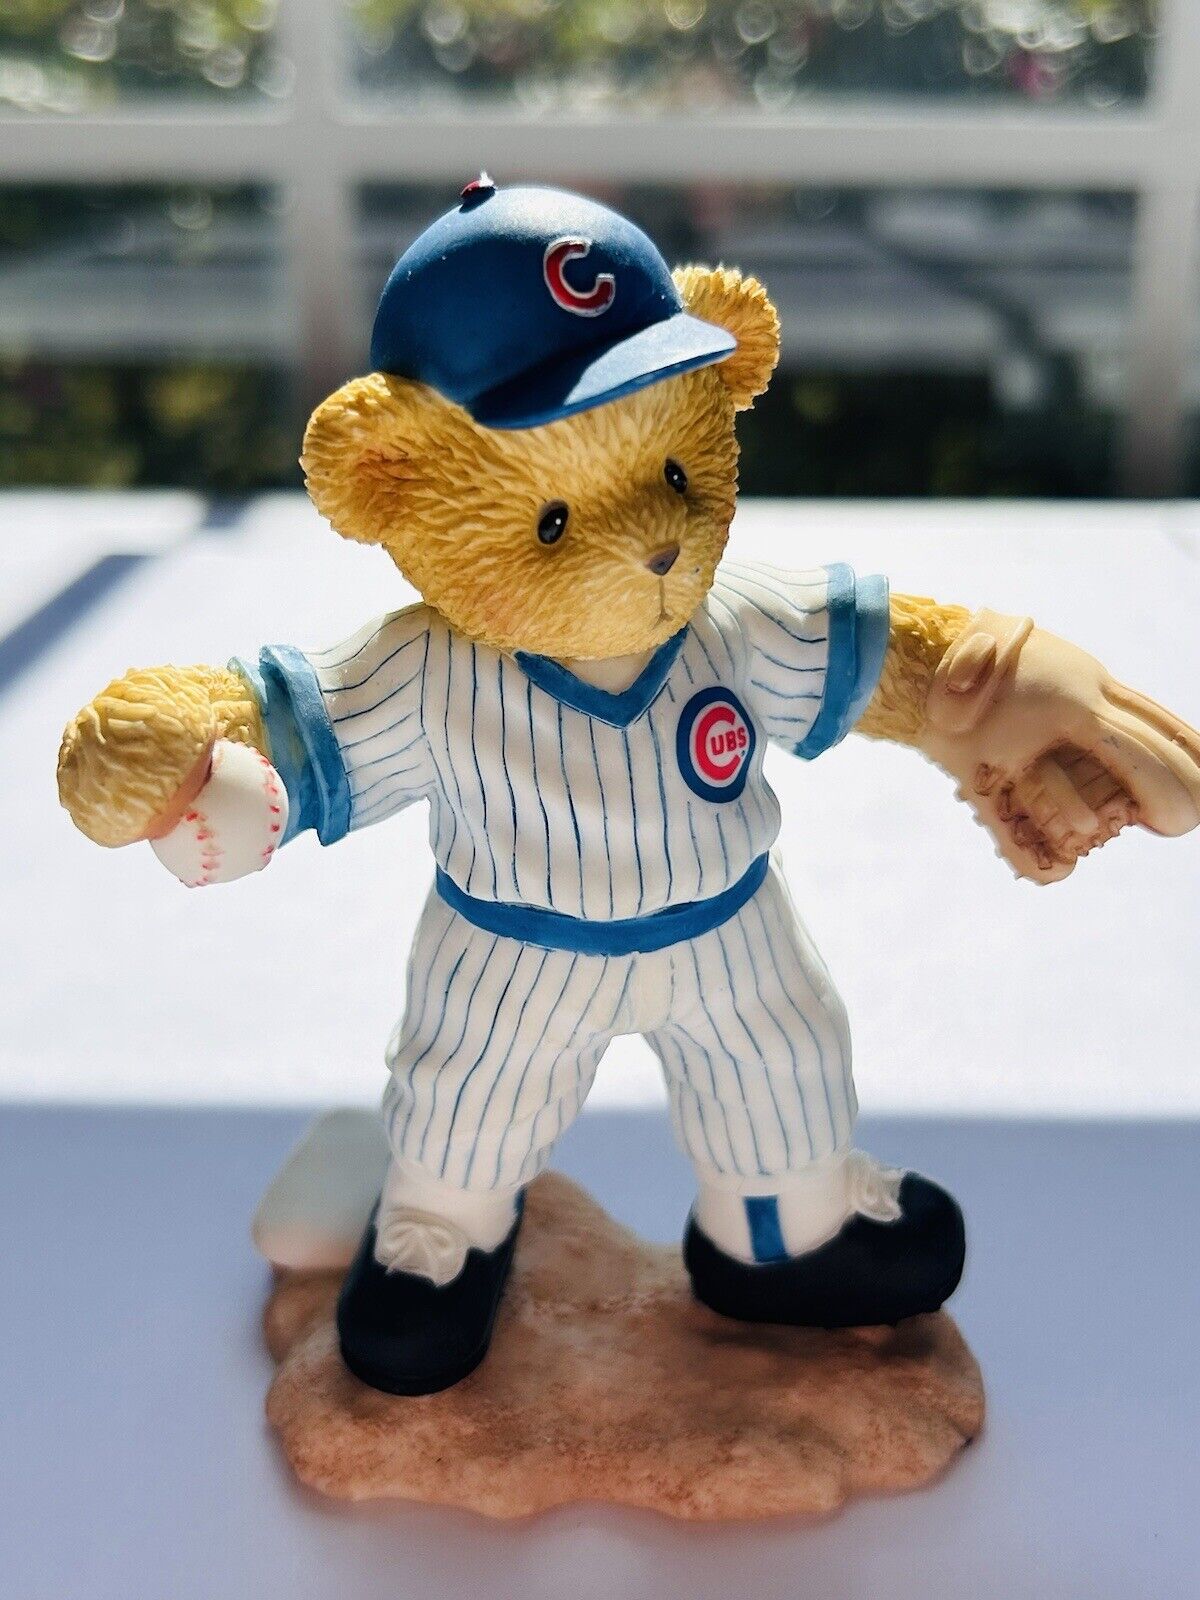 Cherished Teddy 115089 “You’re Second To None” Ryne Sandberg Chicago Cubs 2003